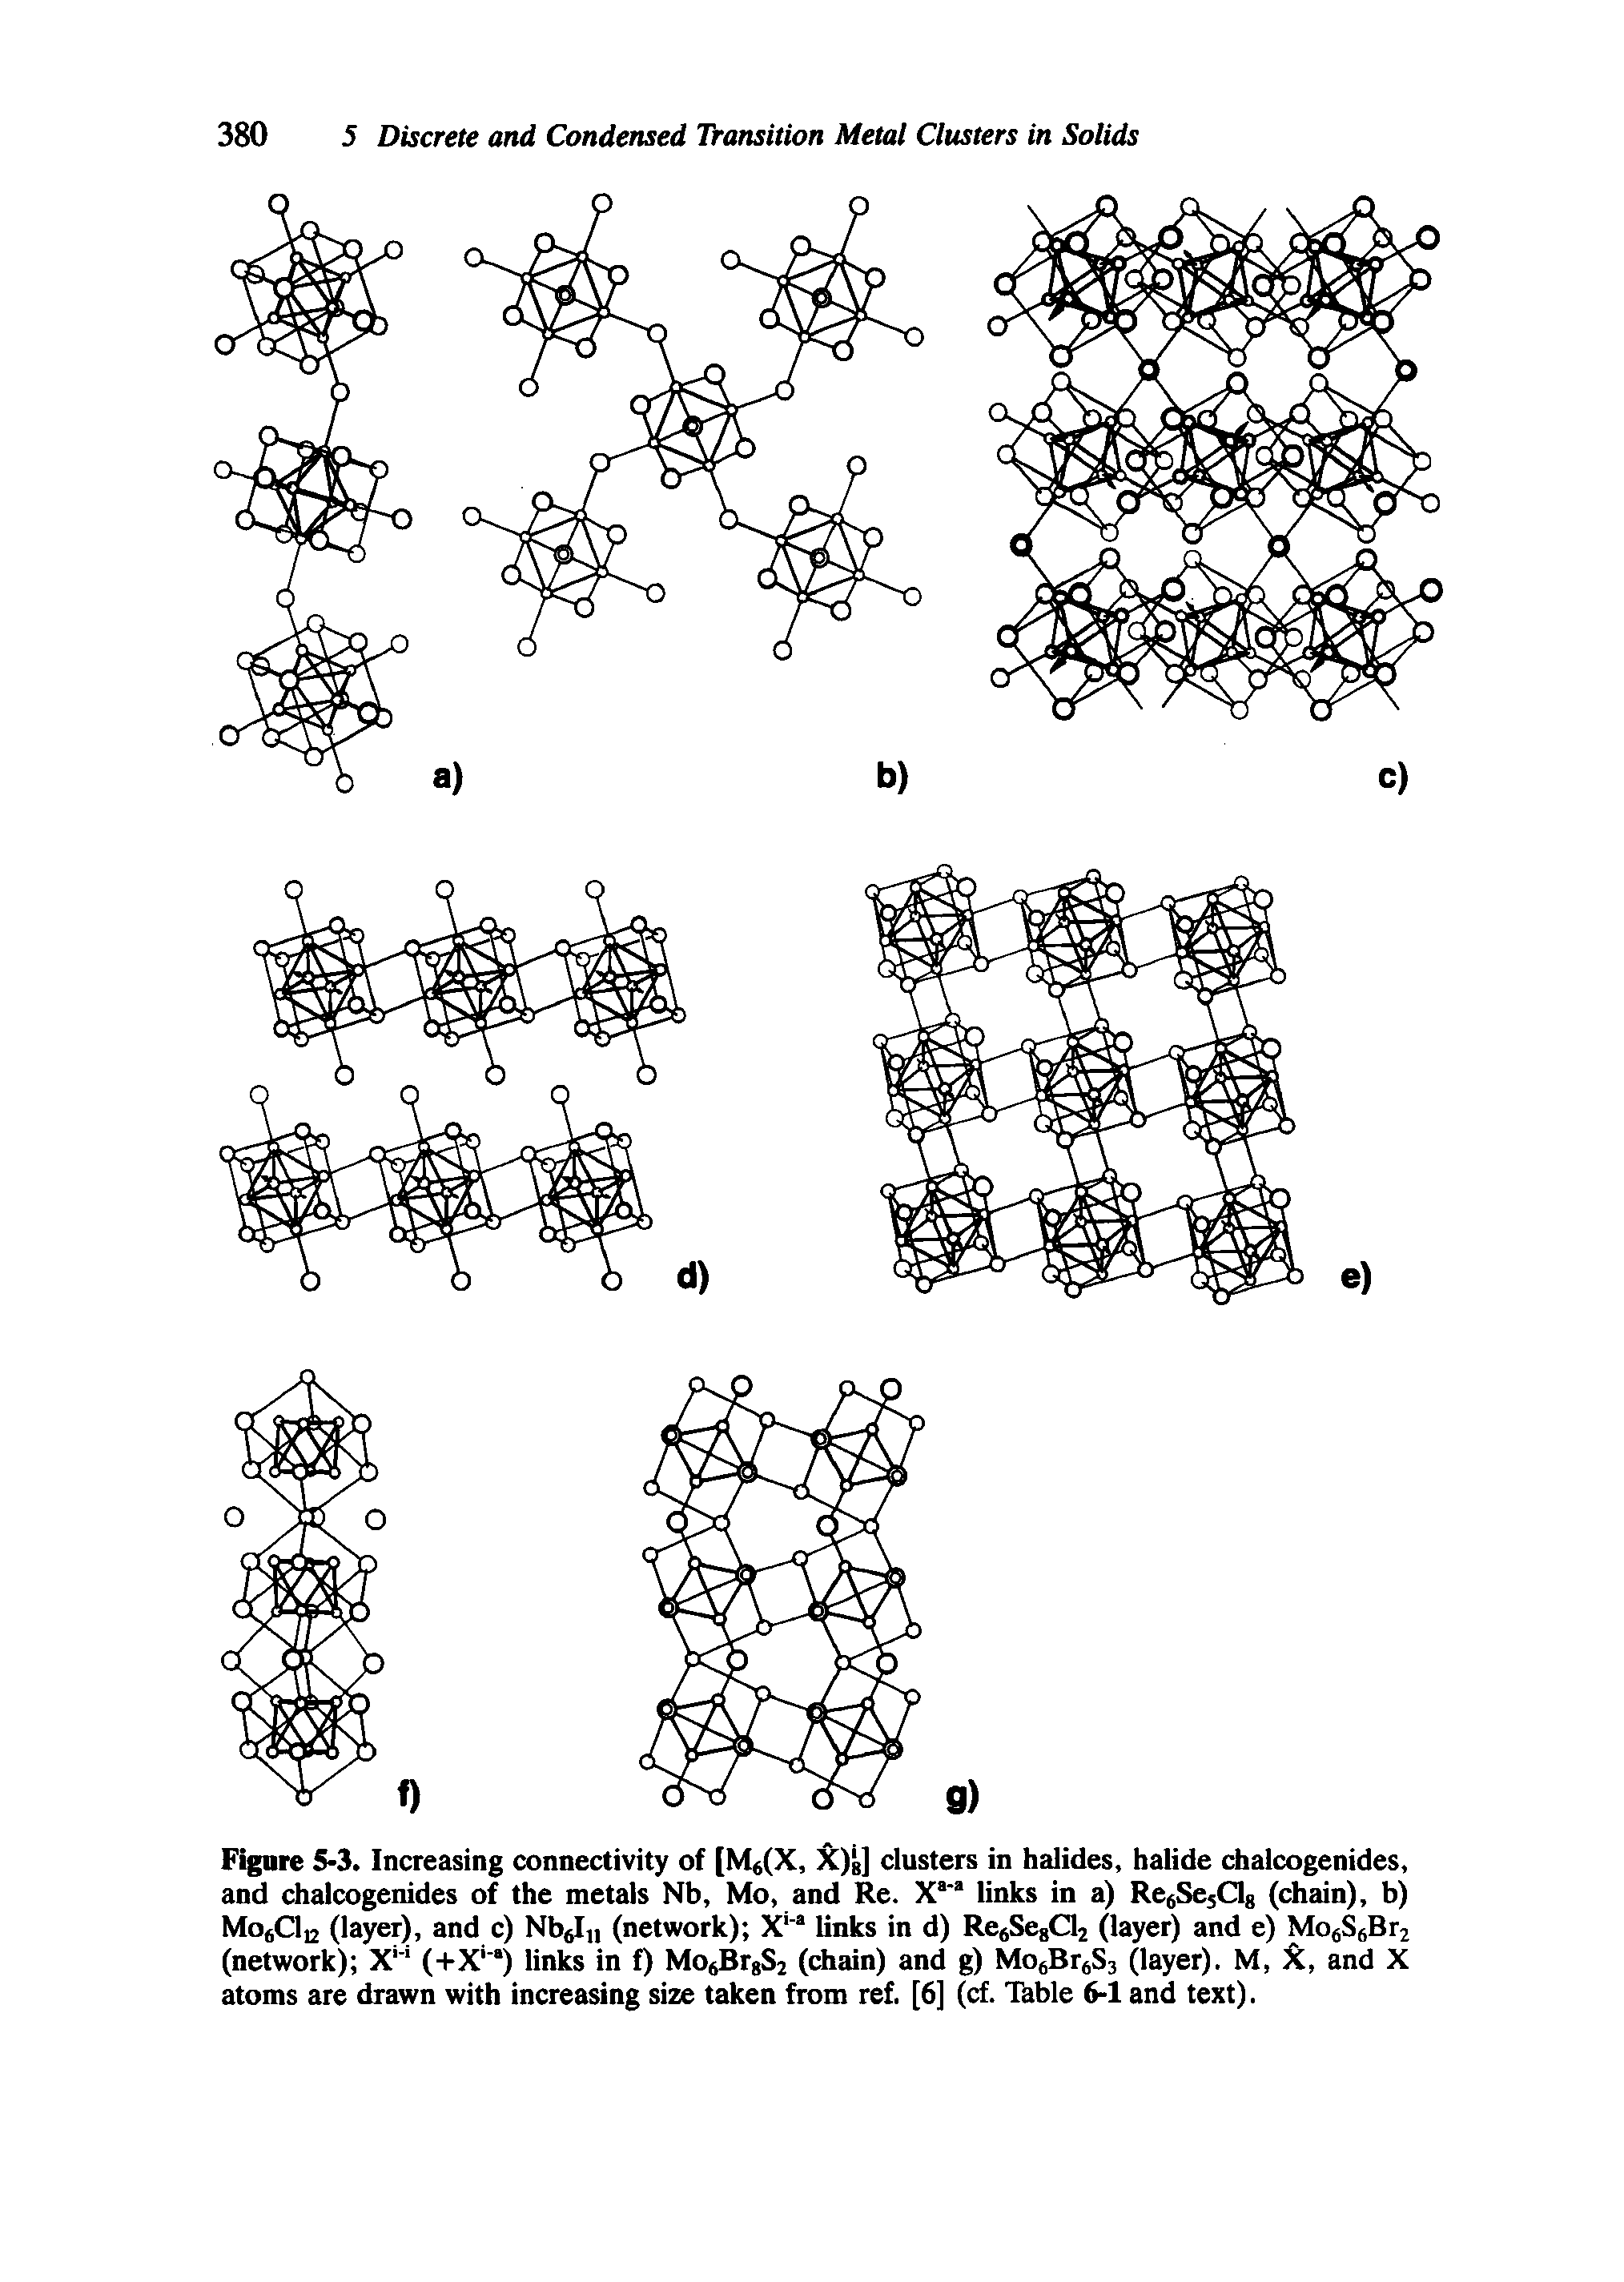 Figure 5>3. Increasing connectivity of [M (X, X) dusters in halides, halide dialcogenides, and dialcogenides of the metals Nb, Mo, and Re. X links in a) RetSesClg (chain), b) MocOq (layer), and c) Nb In (network) X " links in d) Re5SegCl2 (layer) and e) MOjS6Br2 (network) X (+X ) links in f) Mo BrgSj (diain) and g) MoeBr S3 (layer). M, and X atoms are drawn with increasing size taken from ref. [6] (cf. Ikble 6-1 and text).